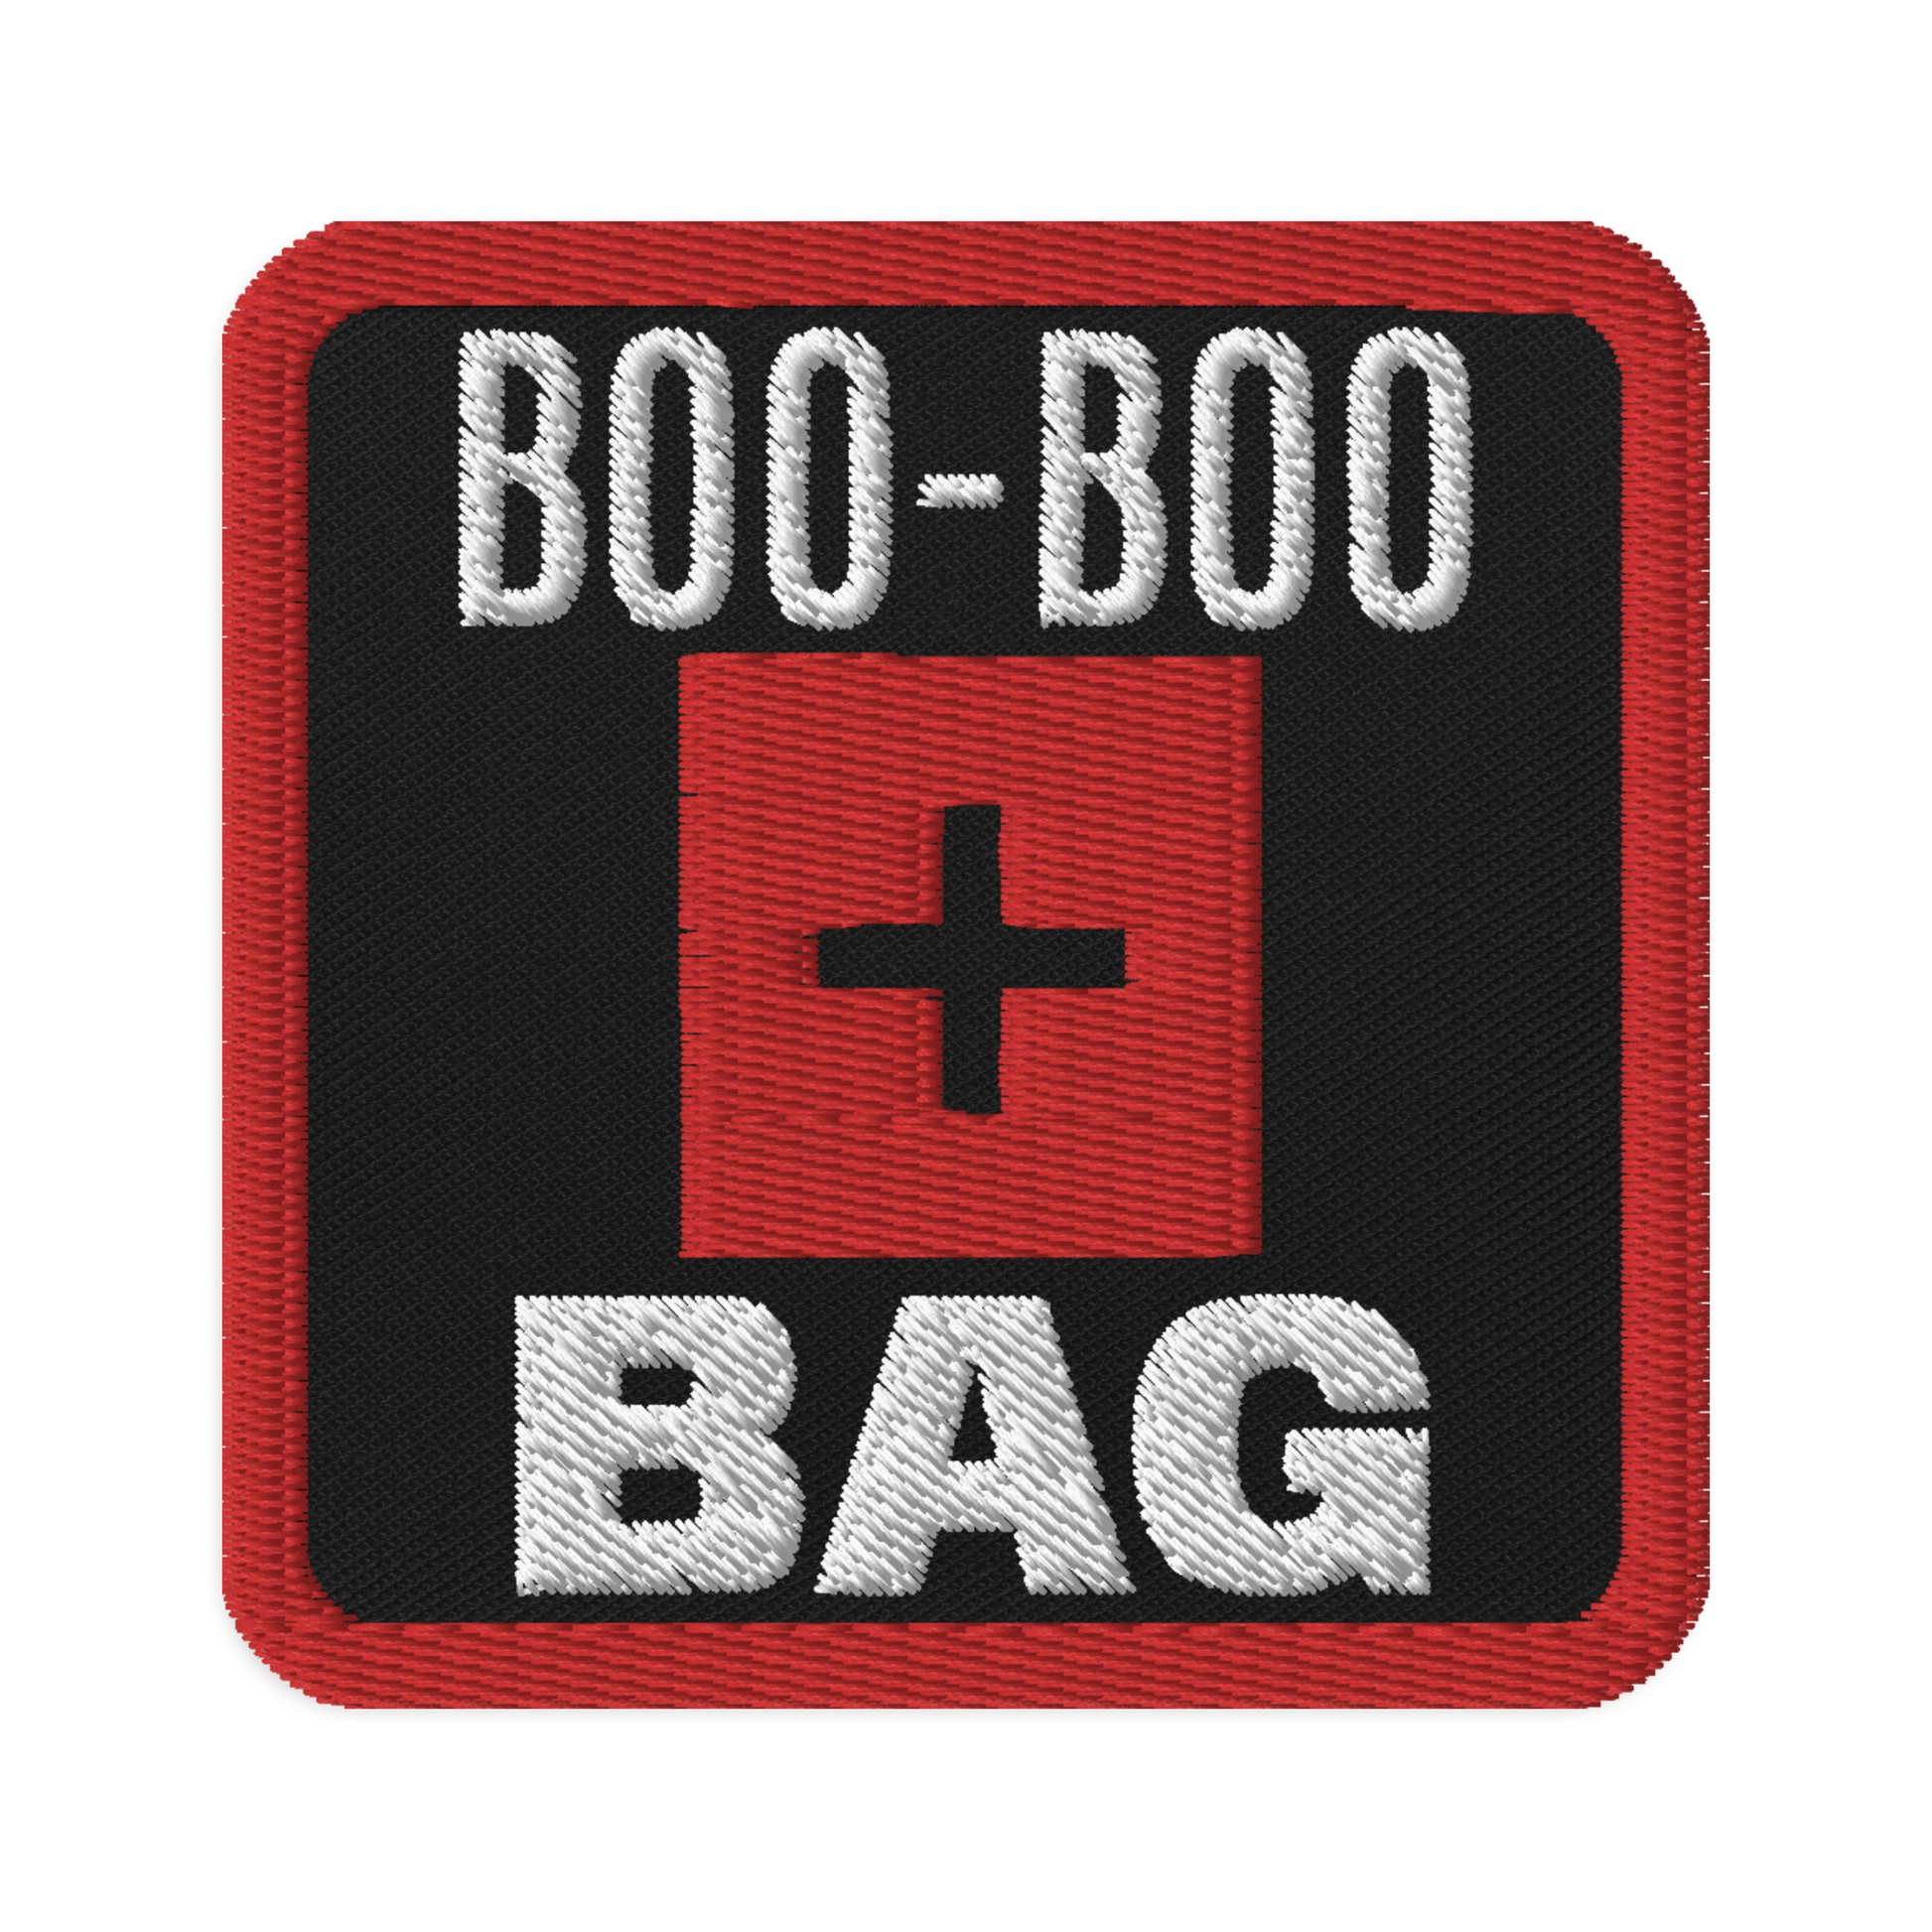 Medical Patches: Boo-Boo Bag – Red Pawn Shop